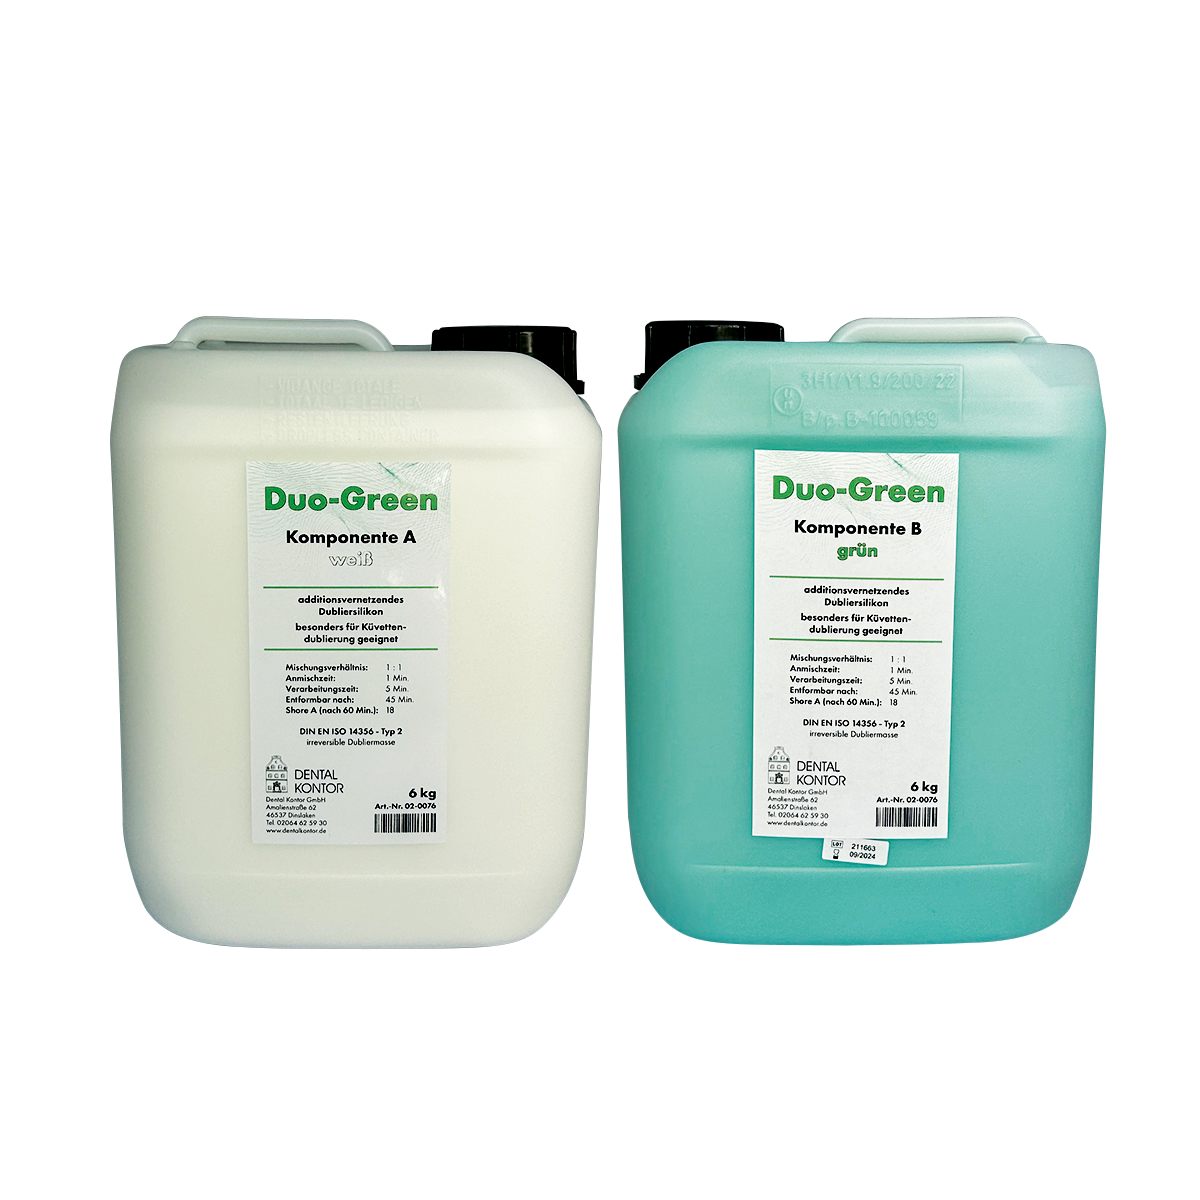 Duo-Green - 2 x 6 kg Kanister